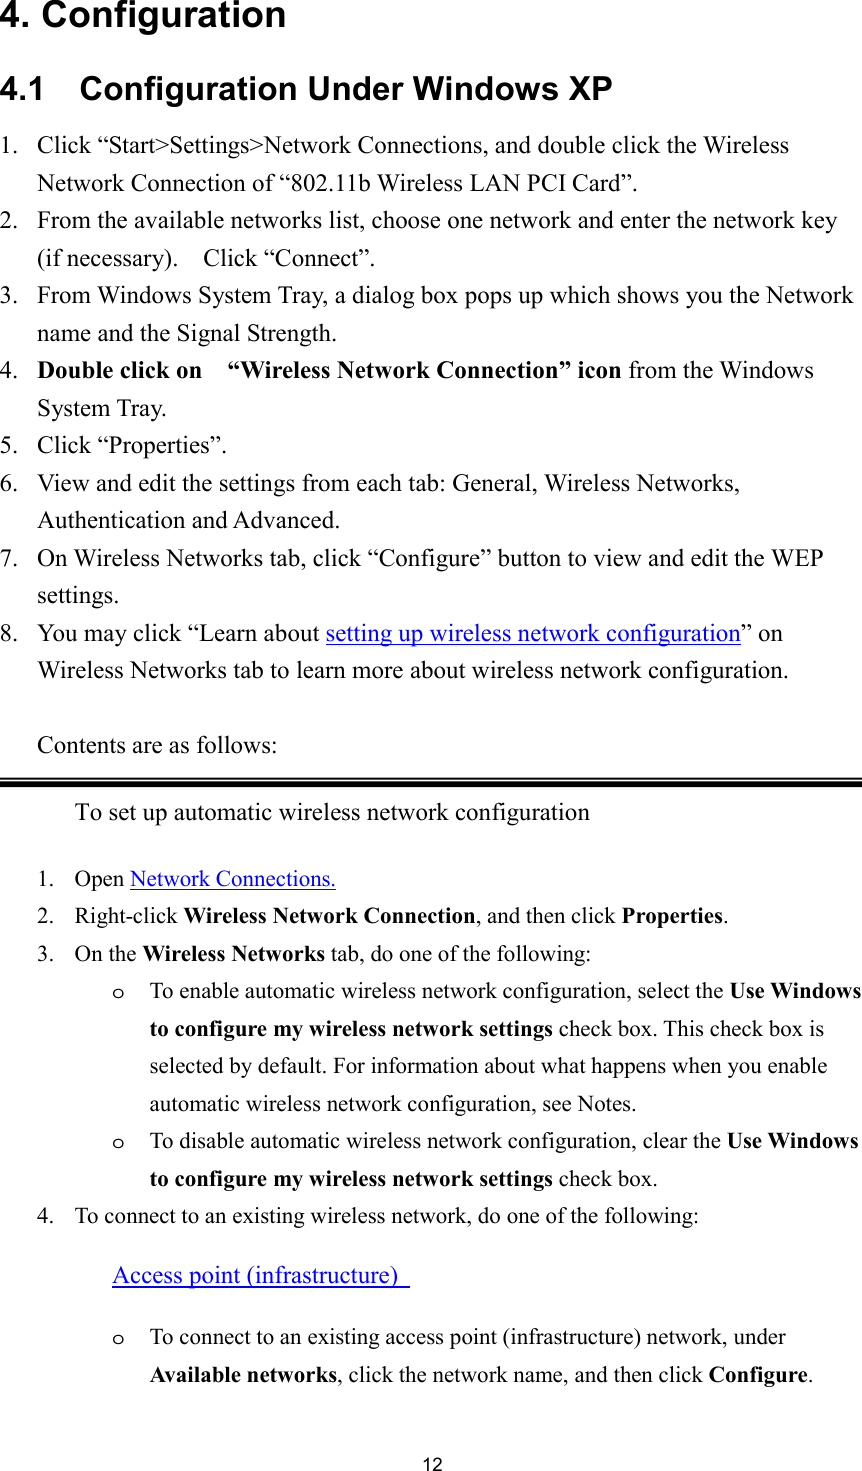  124. Configuration 4.1    Configuration Under Windows XP 1. Click “Start&gt;Settings&gt;Network Connections, and double click the Wireless Network Connection of “802.11b Wireless LAN PCI Card”. 2. From the available networks list, choose one network and enter the network key (if necessary).  Click “Connect”. 3. From Windows System Tray, a dialog box pops up which shows you the Network name and the Signal Strength. 4. Double click on   “Wireless Network Connection” icon from the Windows System Tray. 5. Click “Properties”. 6. View and edit the settings from each tab: General, Wireless Networks, Authentication and Advanced. 7. On Wireless Networks tab, click “Configure” button to view and edit the WEP settings. 8. You may click “Learn about setting up wireless network configuration” on Wireless Networks tab to learn more about wireless network configuration.   Contents are as follows: To set up automatic wireless network configuration 1. Open Network Connections.2. Right-click Wireless Network Connection, and then click Properties.3. On the Wireless Networks tab, do one of the following:   oTo enable automatic wireless network configuration, select the Use Windows to configure my wireless network settings check box. This check box is selected by default. For information about what happens when you enable automatic wireless network configuration, see Notes.   oTo disable automatic wireless network configuration, clear the Use Windows to configure my wireless network settings check box.   4. To connect to an existing wireless network, do one of the following:   Access point (infrastructure) oTo connect to an existing access point (infrastructure) network, under Available networks, click the network name, and then click Configure.